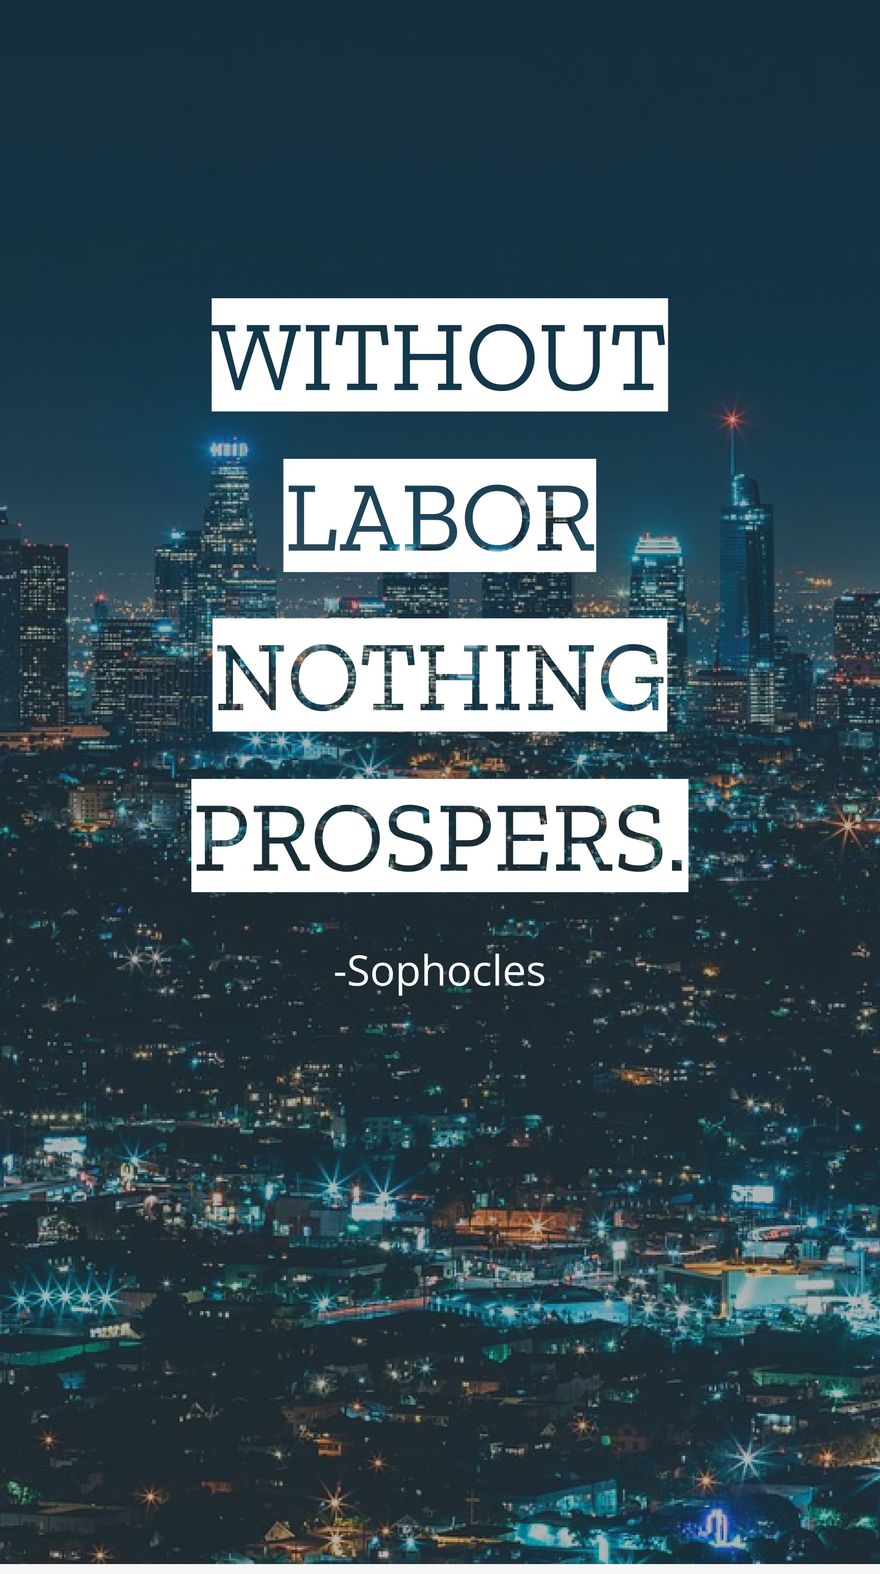 Sophocles - Without labor nothing prospers. Template